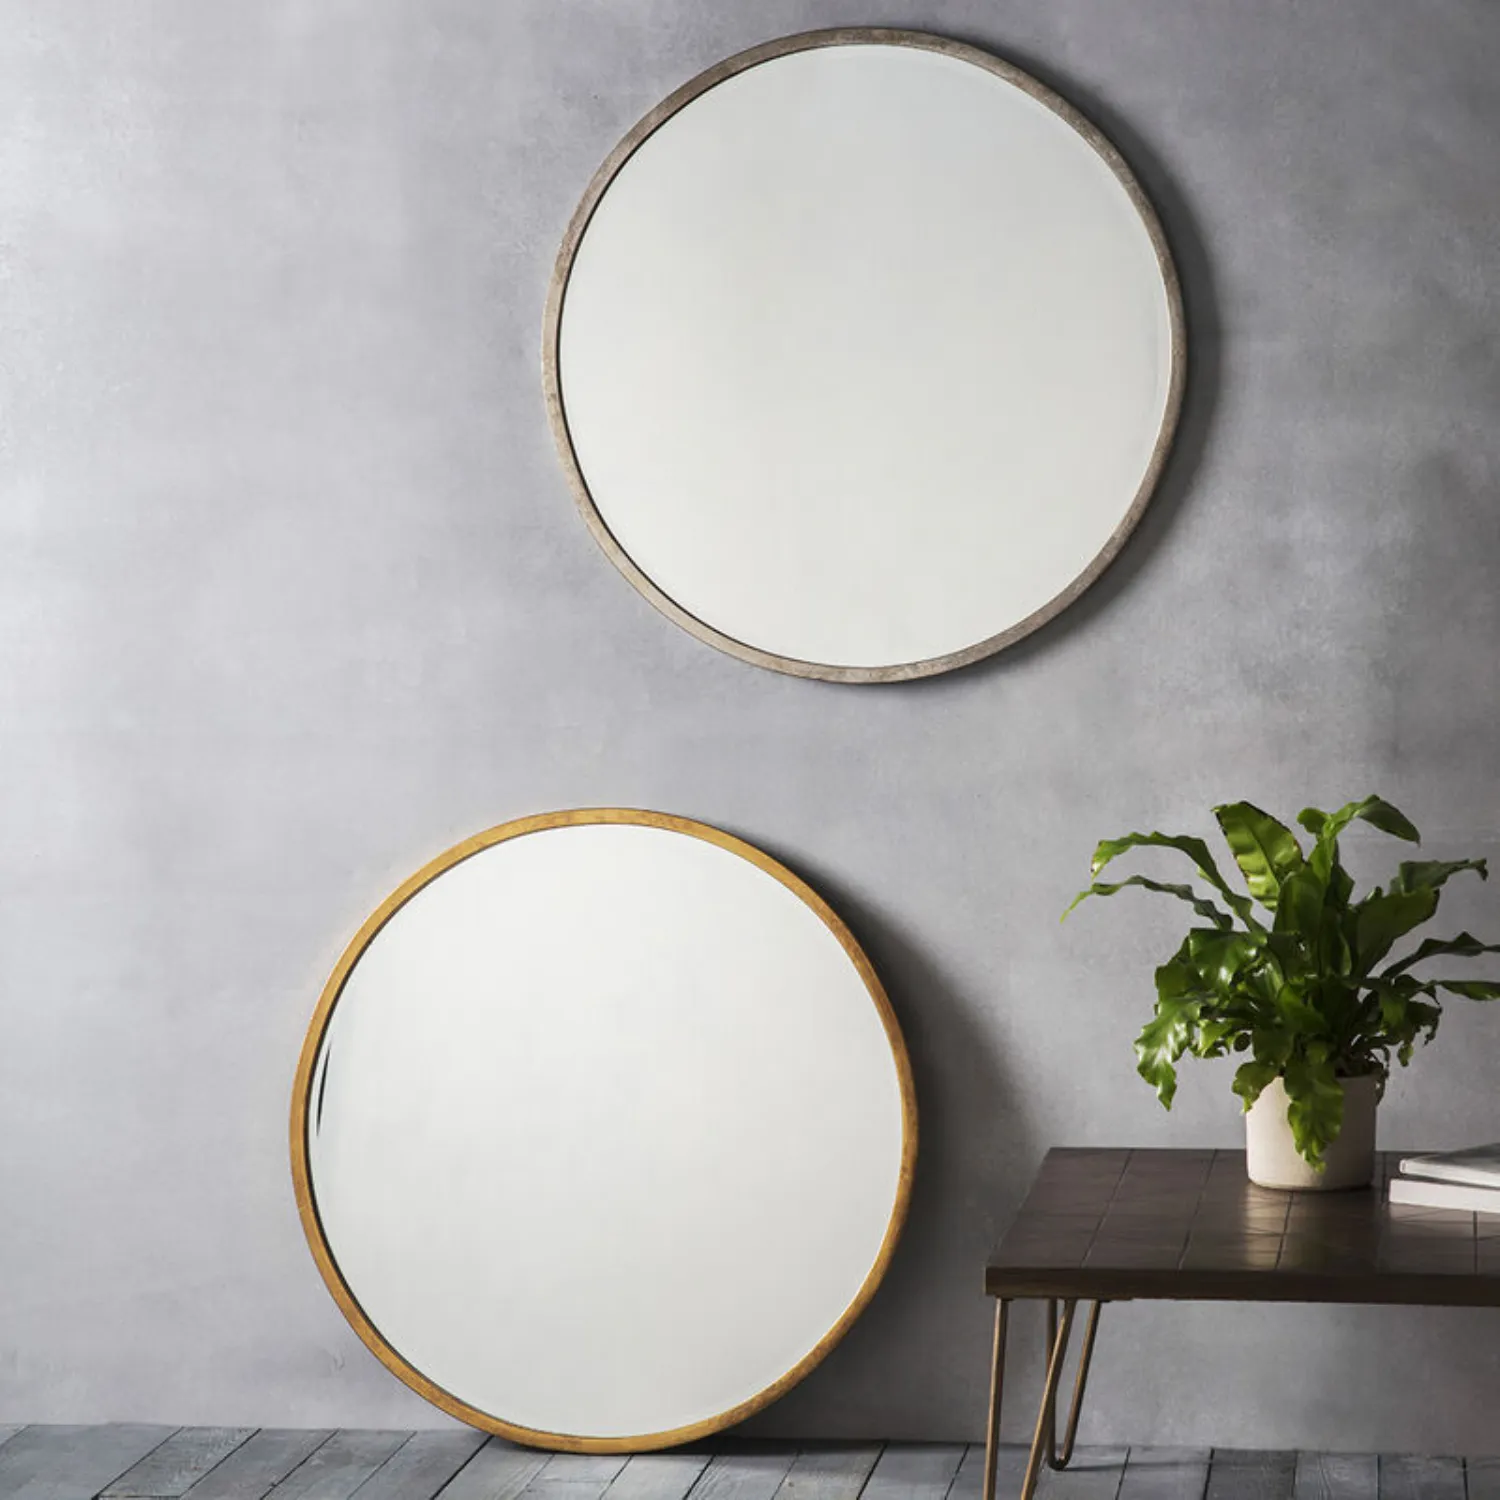 Antique Silver Thin Metal Framed Round Wall Mirror